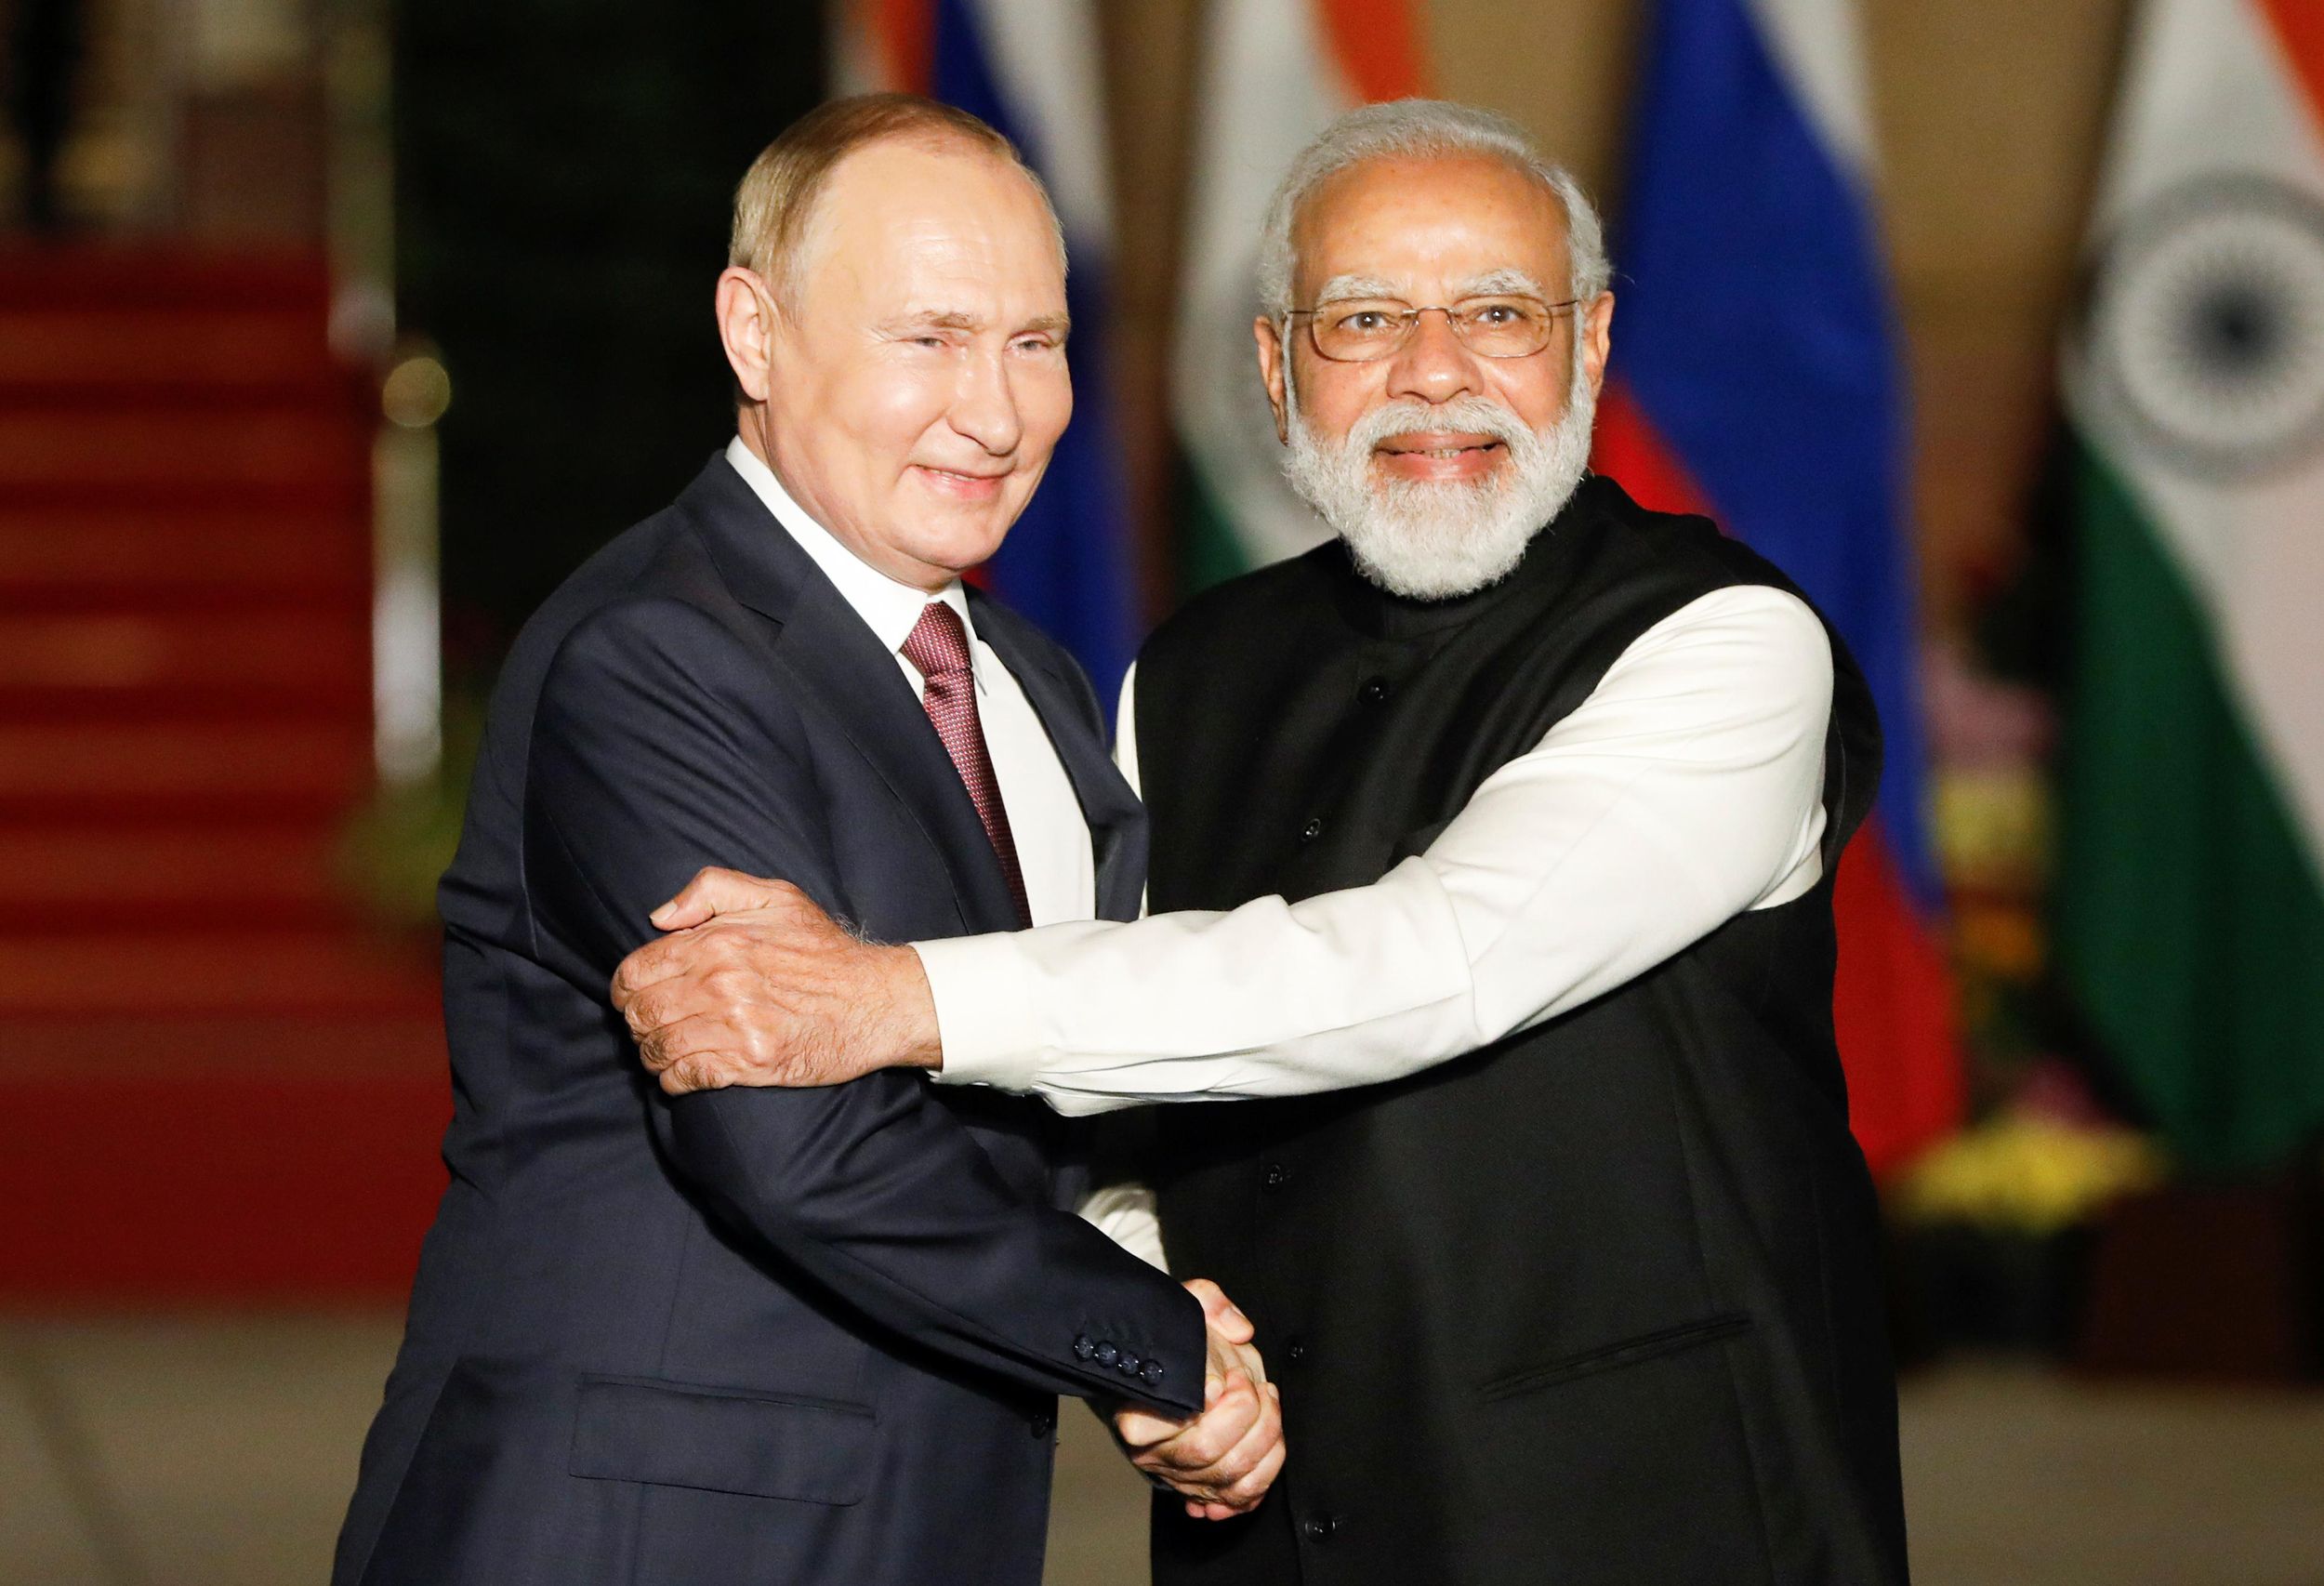 India’s fence-sitting on Ukraine hurts its chances of becoming global leader